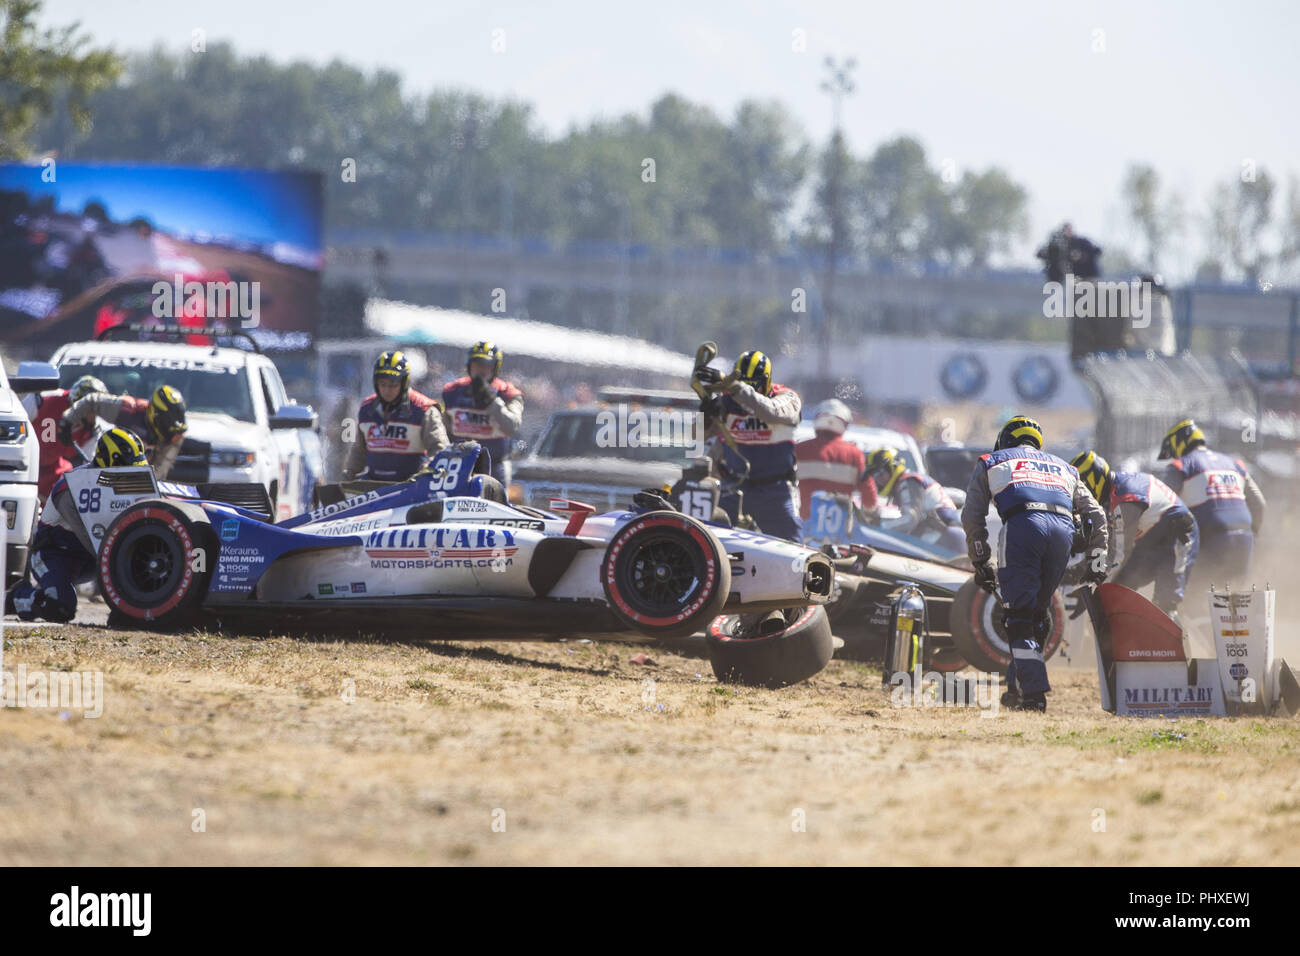 Portland, Oregon, United Stated. 2nd Sep, 2018. MARCO ANDRETTI (98) of the United States gets airborne and flips during the opening lap of the Portland International Raceway at Portland International Raceway in Portland, Oregon. Credit: Justin R. Noe Asp Inc/ASP/ZUMA Wire/Alamy Live News Stock Photo